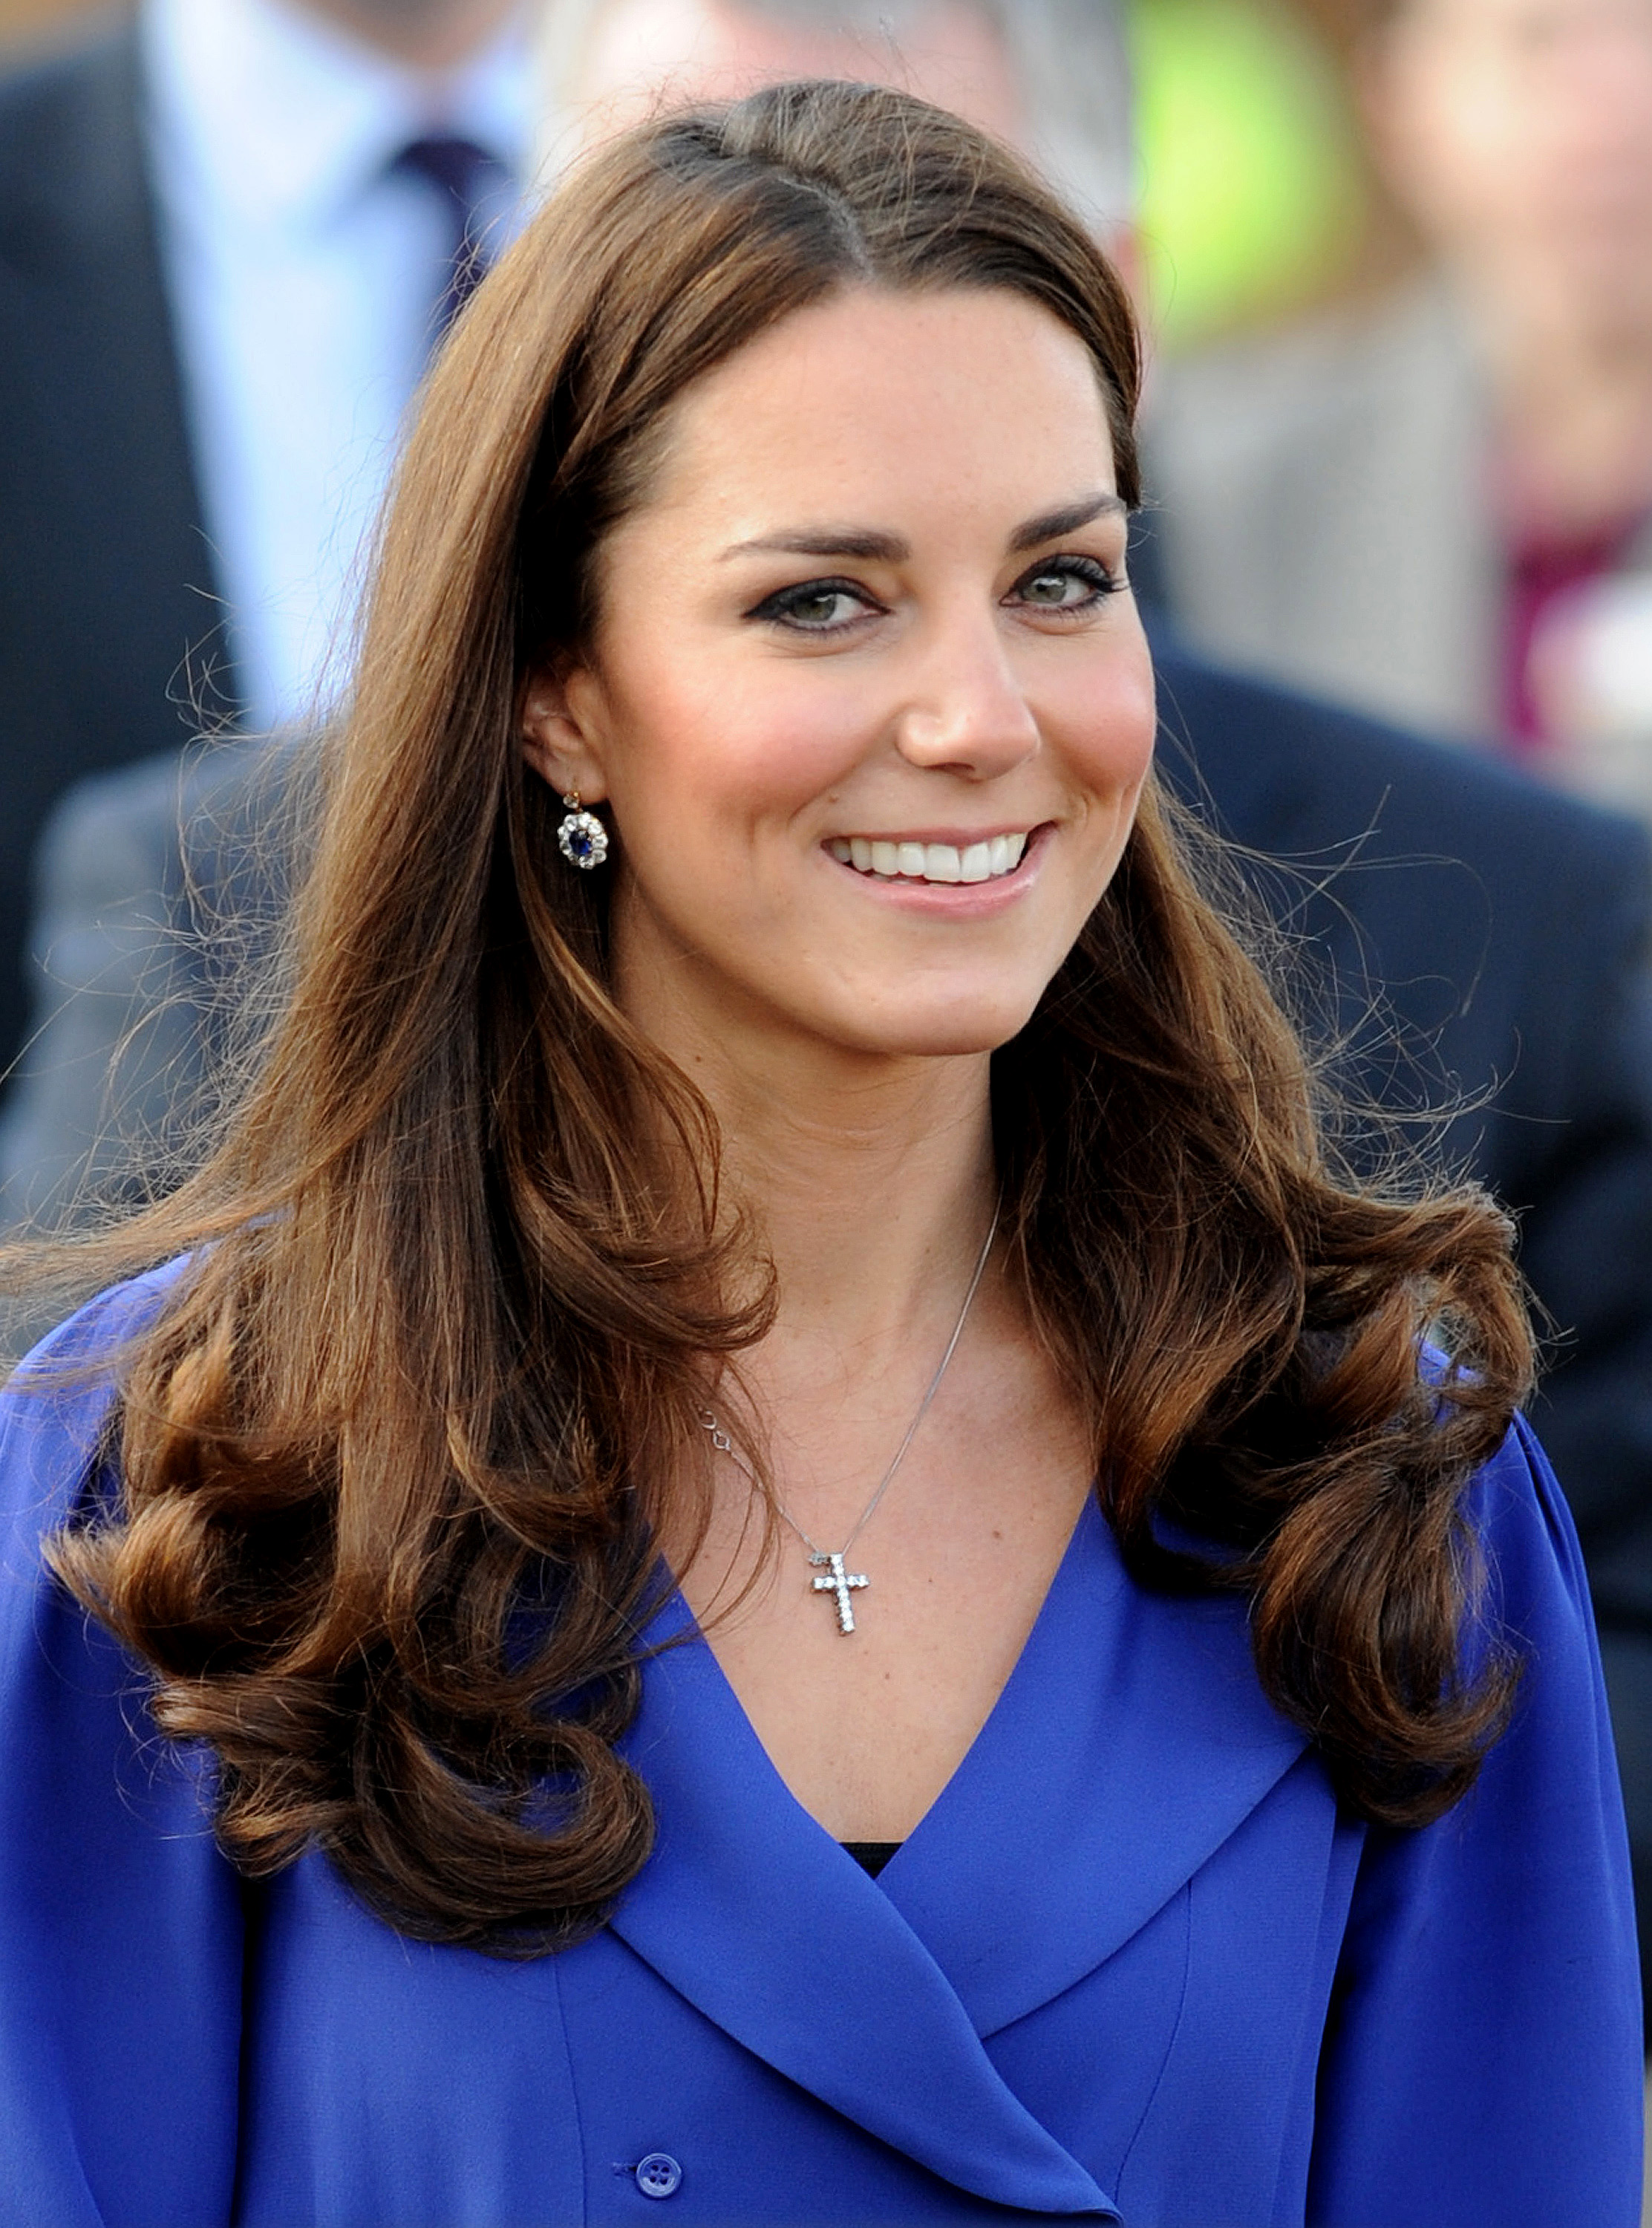 Kate Middleton Is Infatuated With These 4 Pieces of Jewelry | Who What Wear